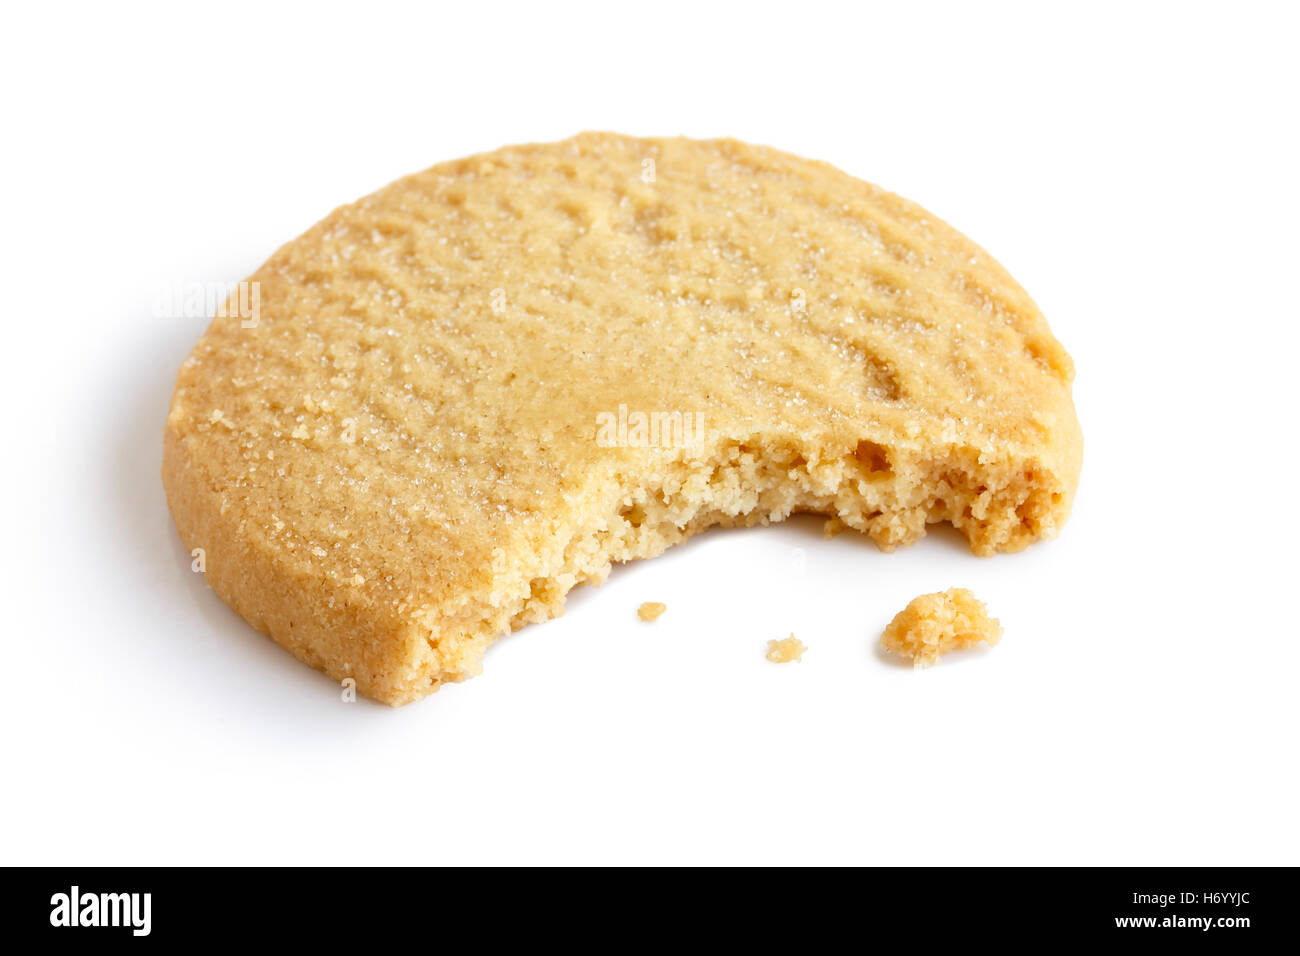 Single round shortbread biscuit with crumbs and bite missing. In perspective. Stock Photo